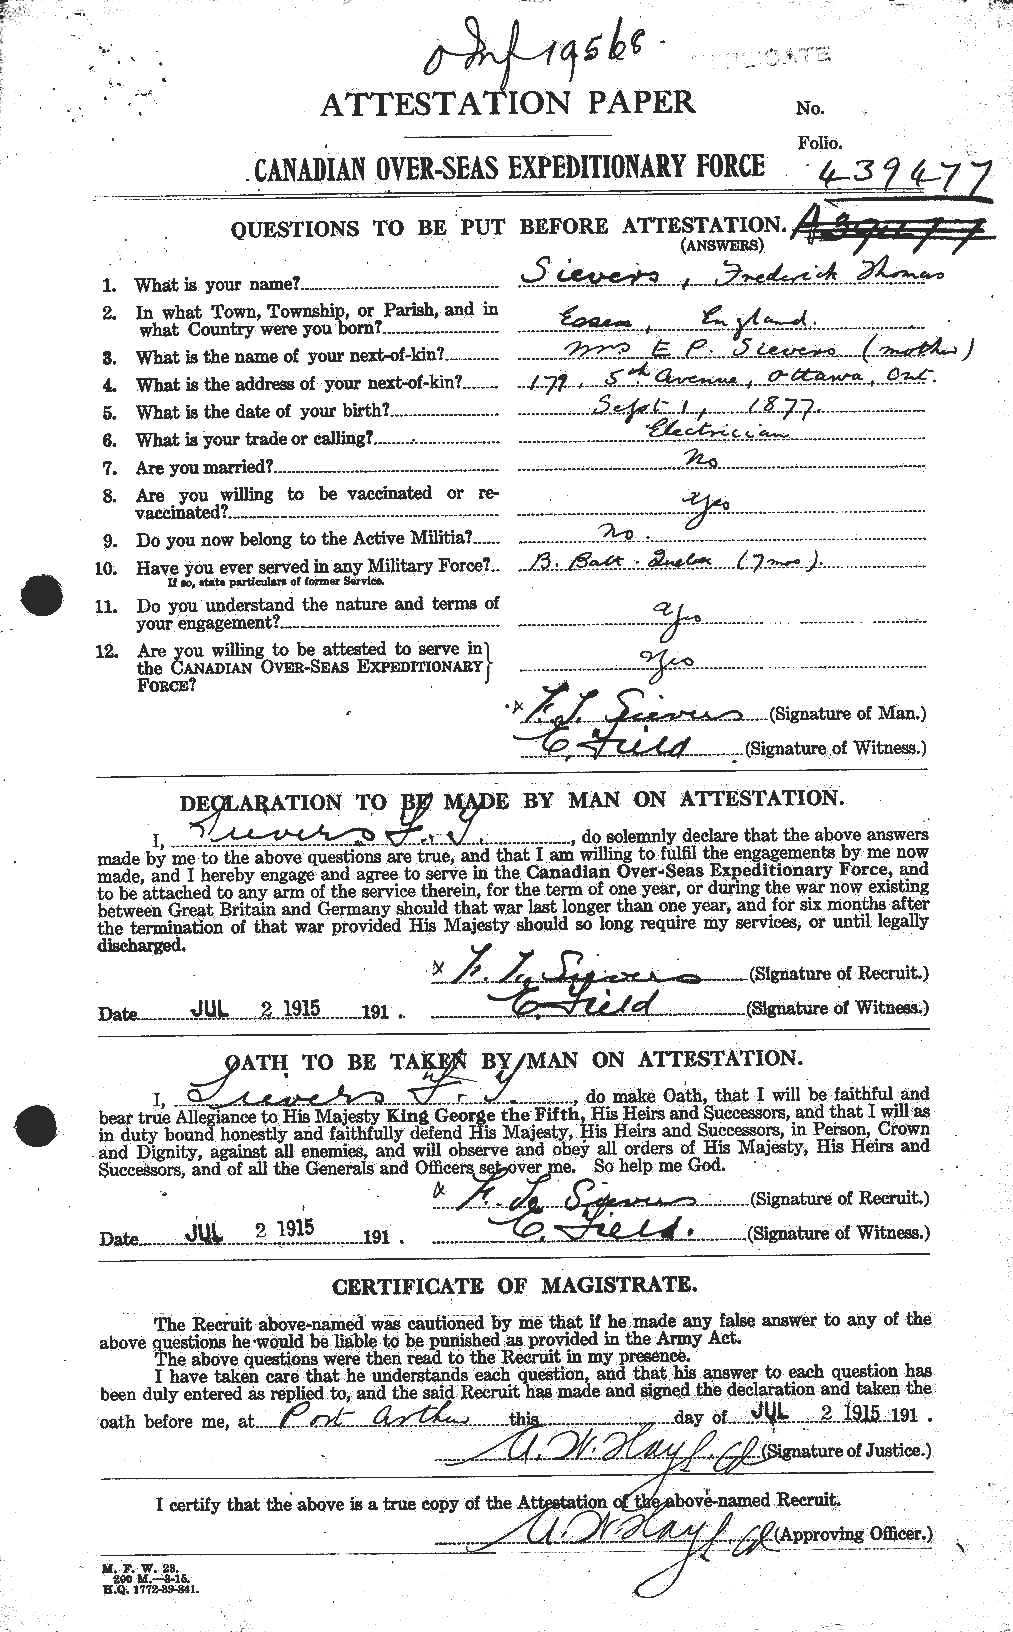 Personnel Records of the First World War - CEF 094638a